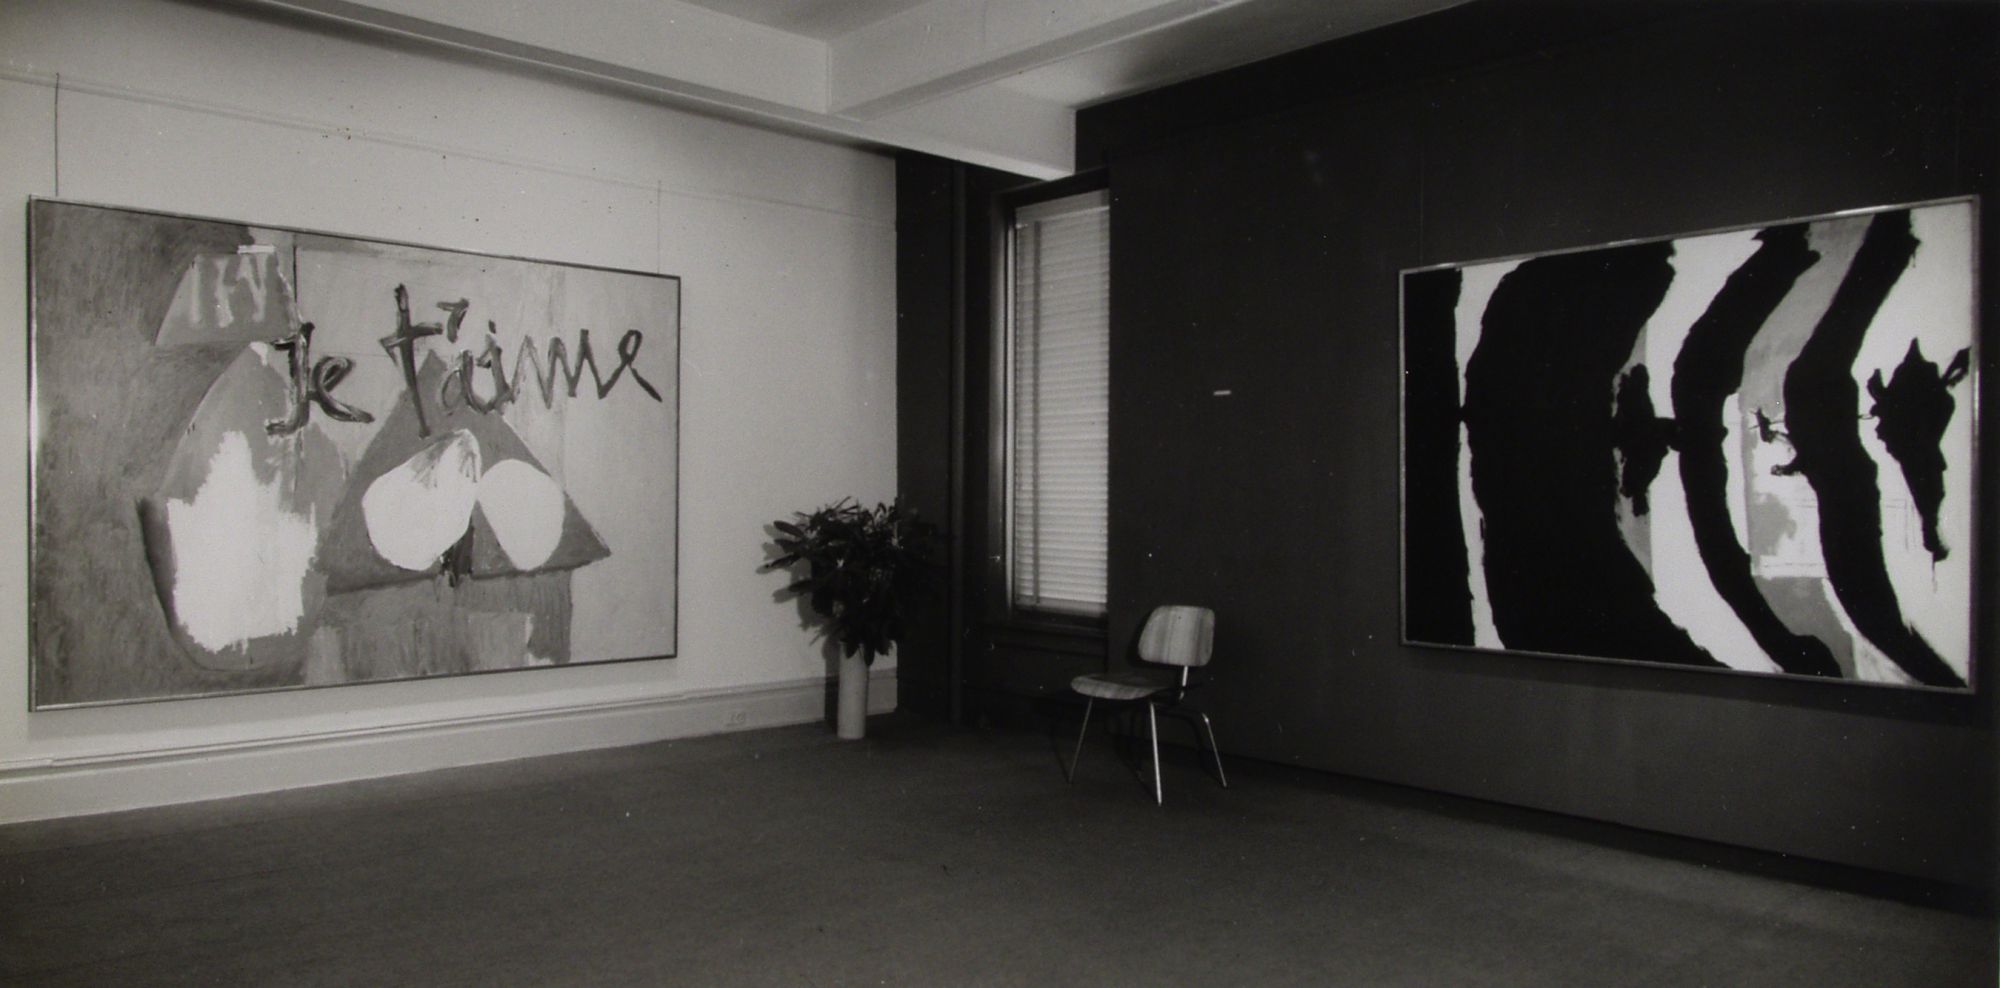 Installation view of Robert Motherwell at the Sidney Janis Gallery, New York, May 1957. From left to right: Je t’aime IV and Wall Painting No. III